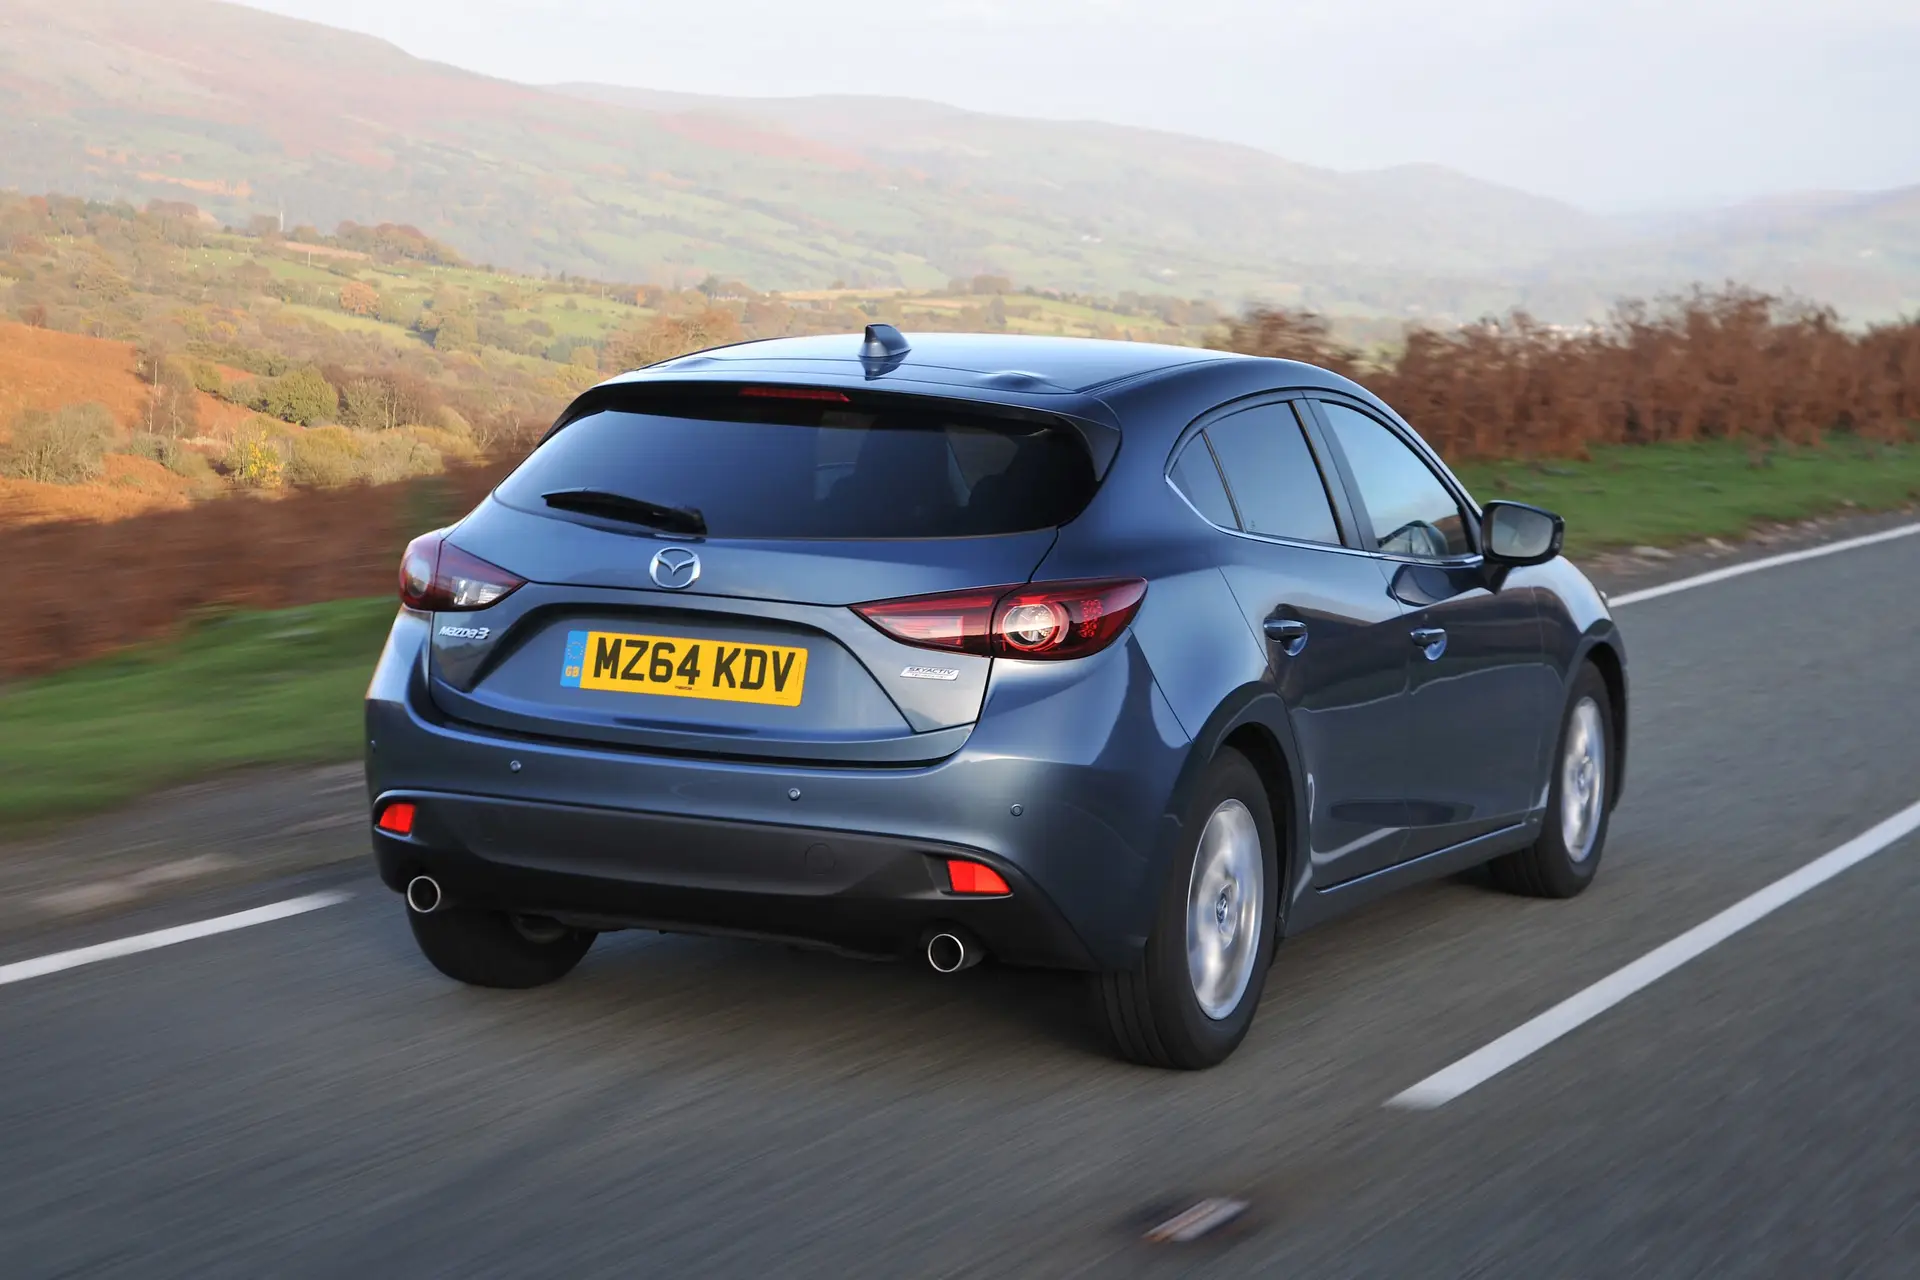 Mazda 3 (2014-2019) Review: exterior rear three quarter photo of the Mazda 3 on the road